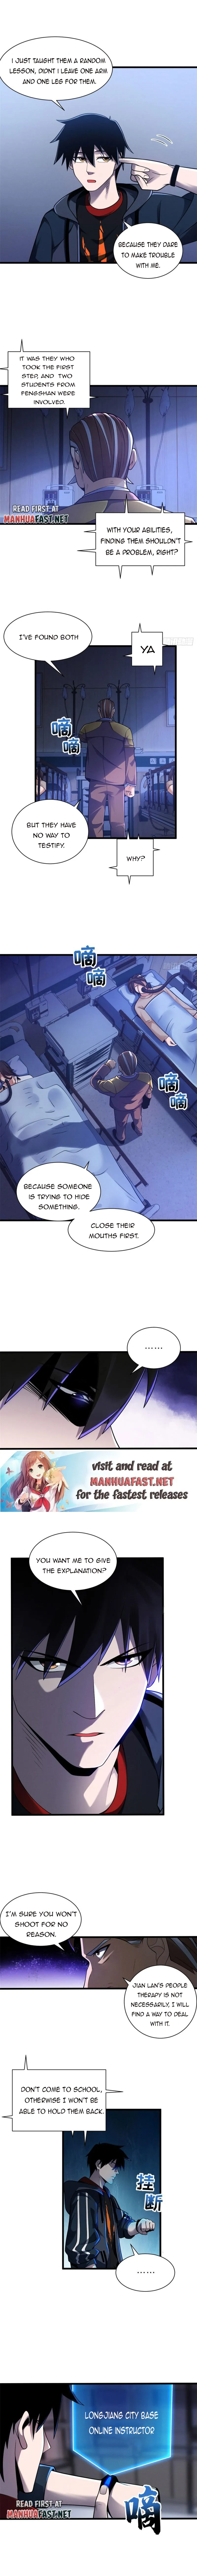 Astral Pet Store chapter 45 page 2